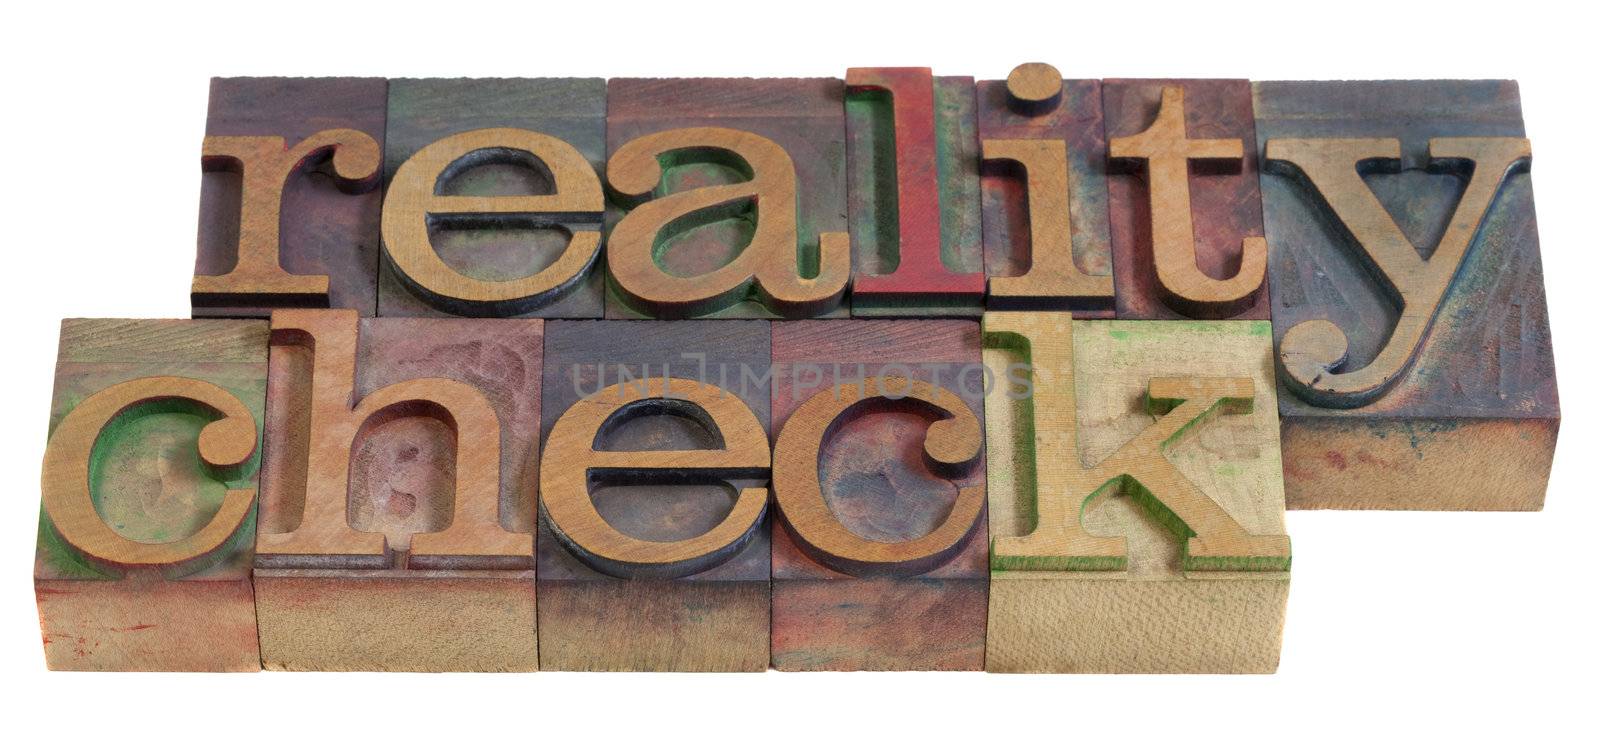 reality check concept  - words in  vintage wooden letterpress printing blocks, stained by color inks, isolated on white